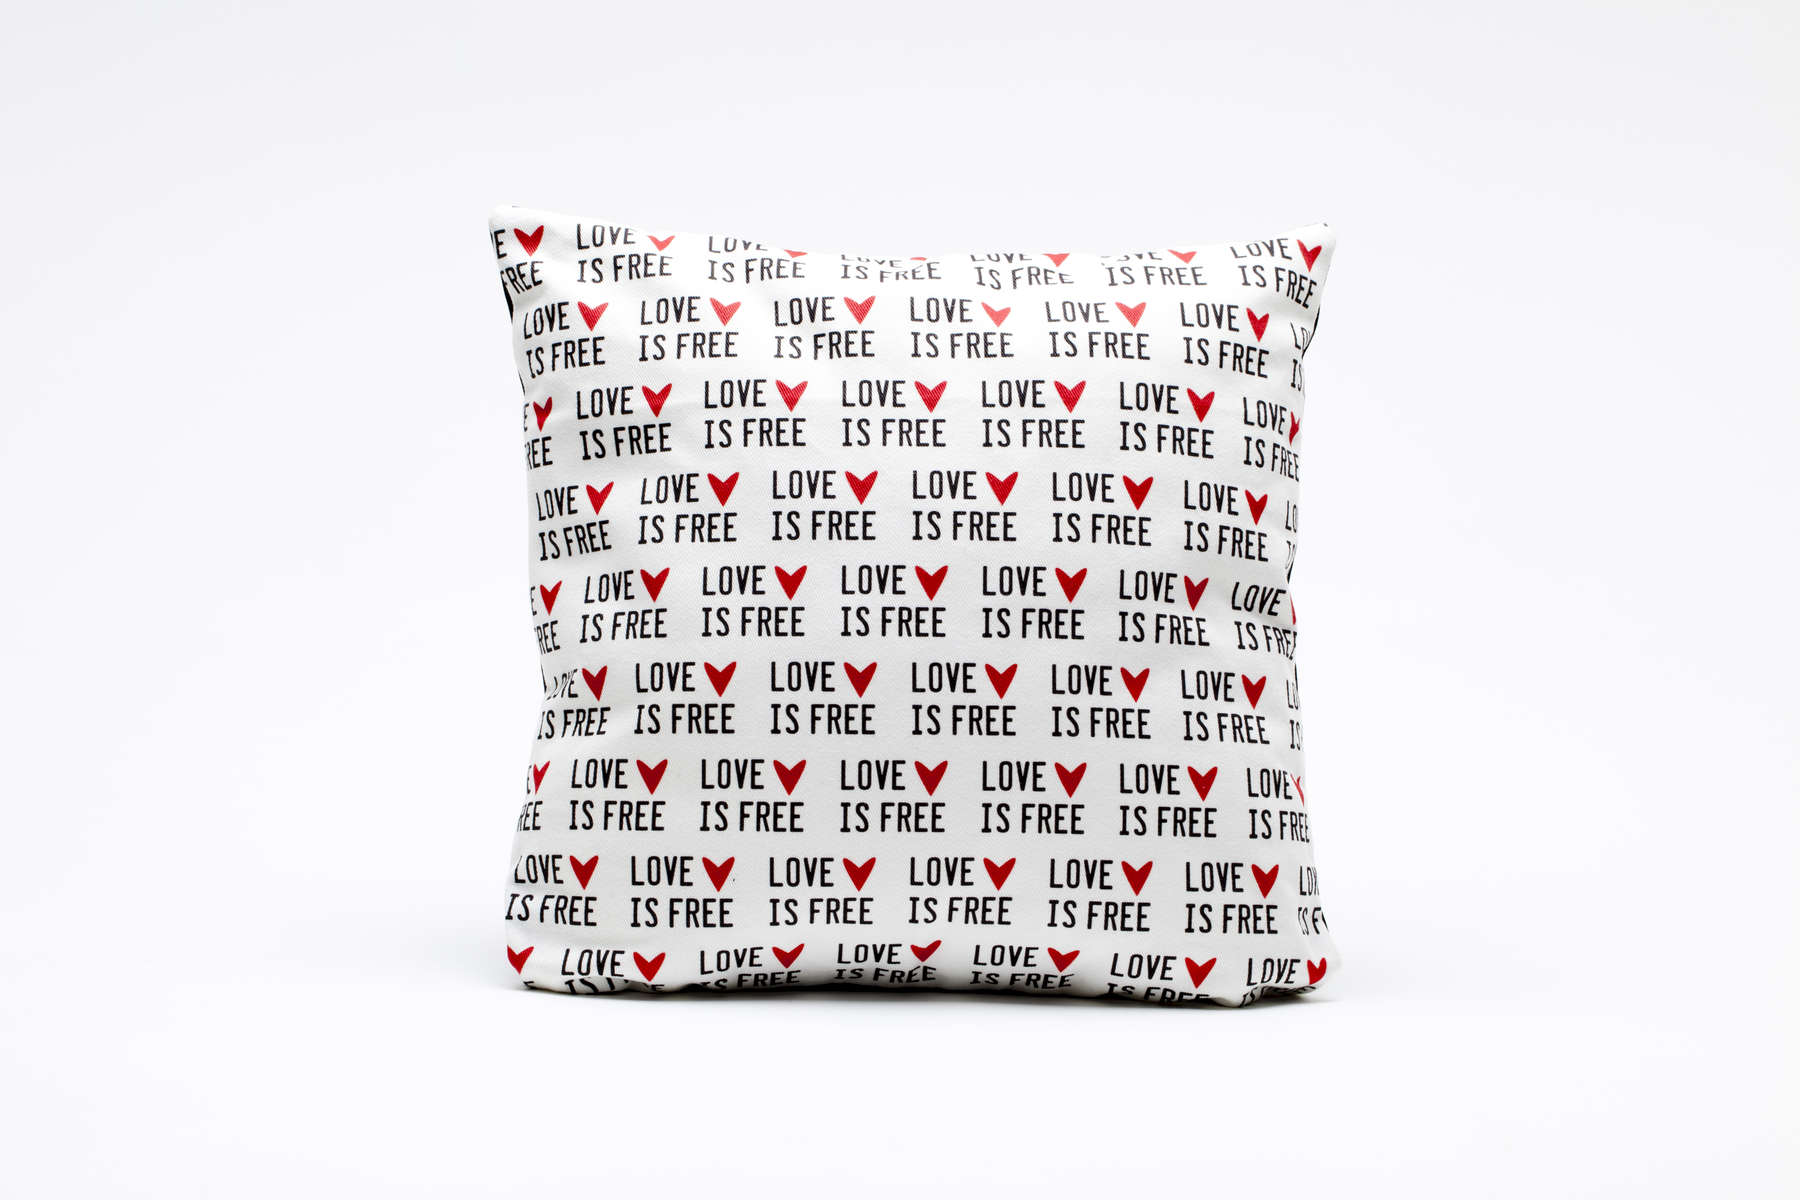 pURCHASE hERElove is free, so why not be generous with yours?this pillow is sure to not only spruce up your space, but also to remind you that love is free for the giving.  printed on heavy cotton twill, this custom doodlegirl designs fabric is both fun and durable // back side is solid black.designed + hand-sewn in boulder, colorado.limited quantities available in three sizes:12x12 12x1614x14